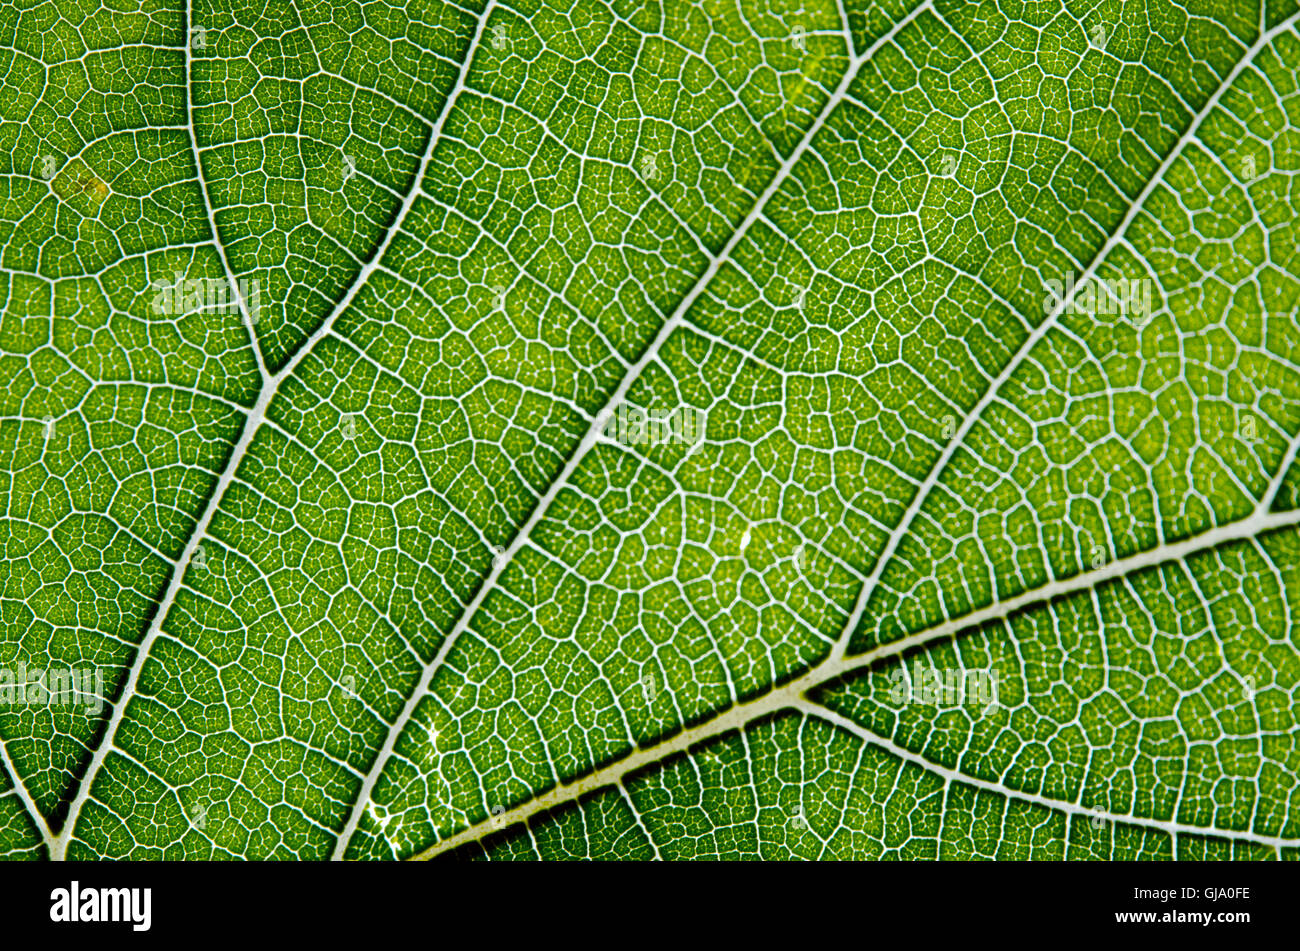 Leaf abstract background texture with veins Stock Photo